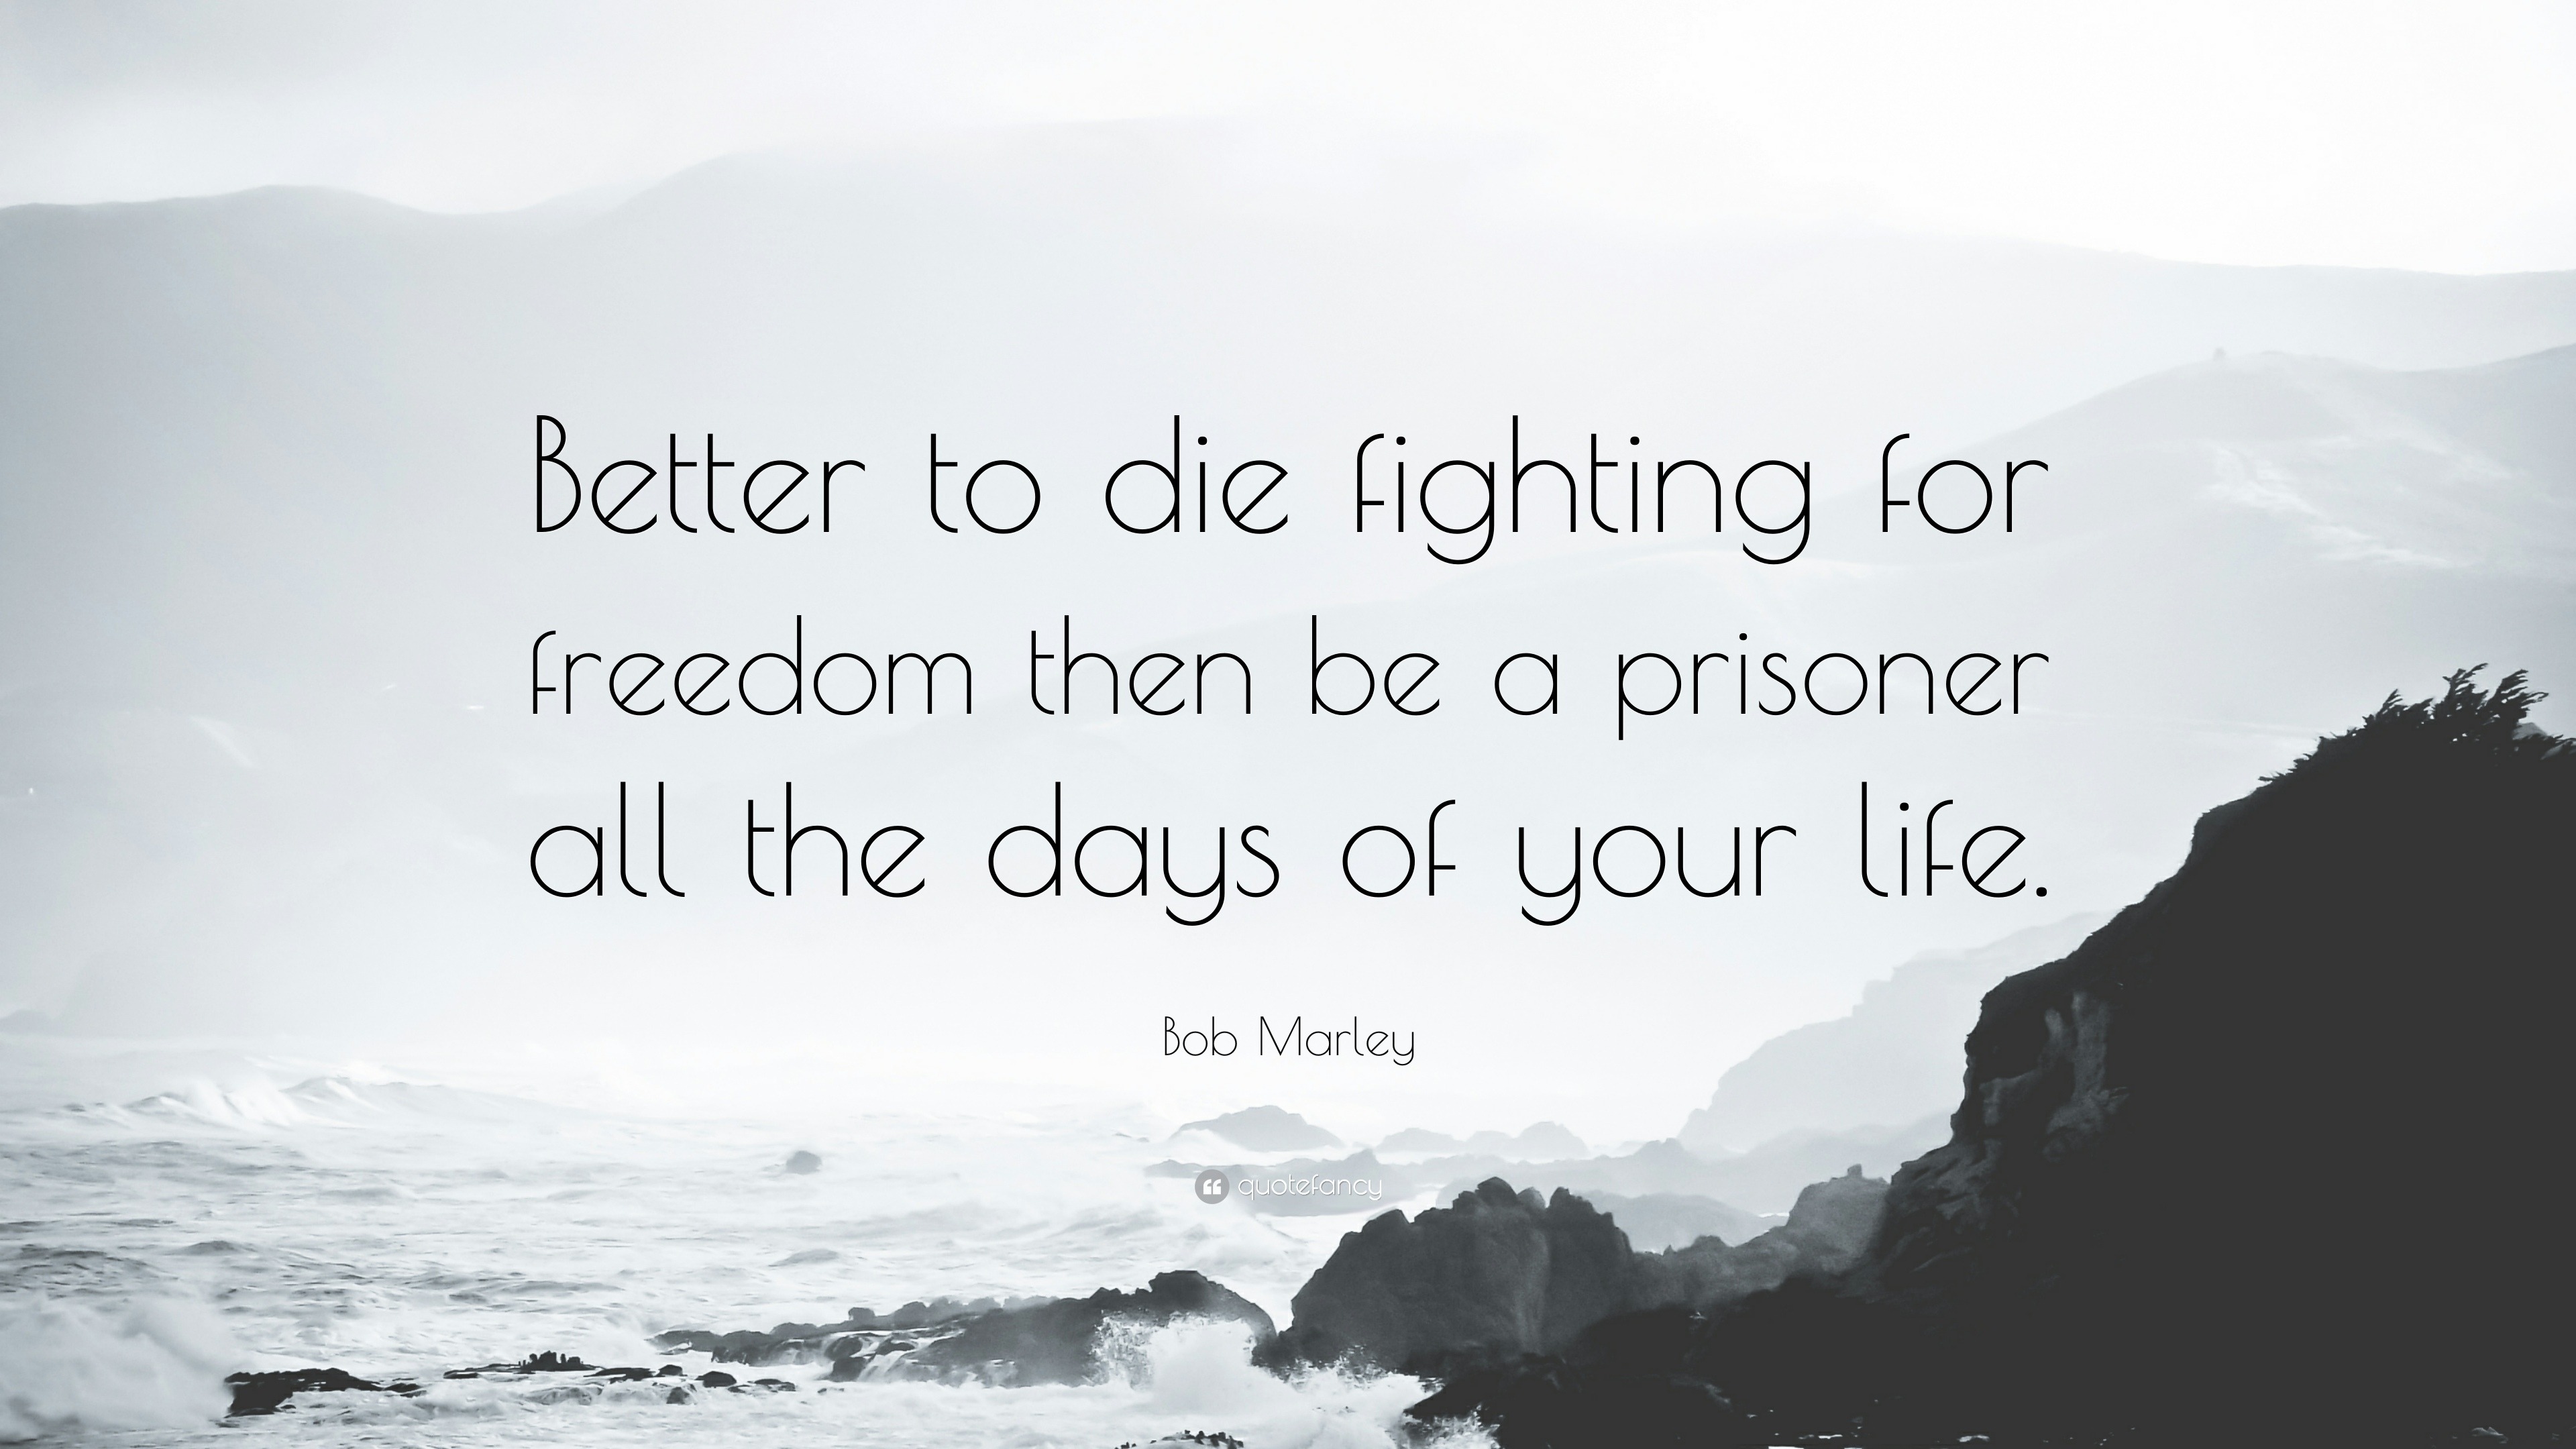 Bob Marley Quote: “Better to die fighting for freedom then be a